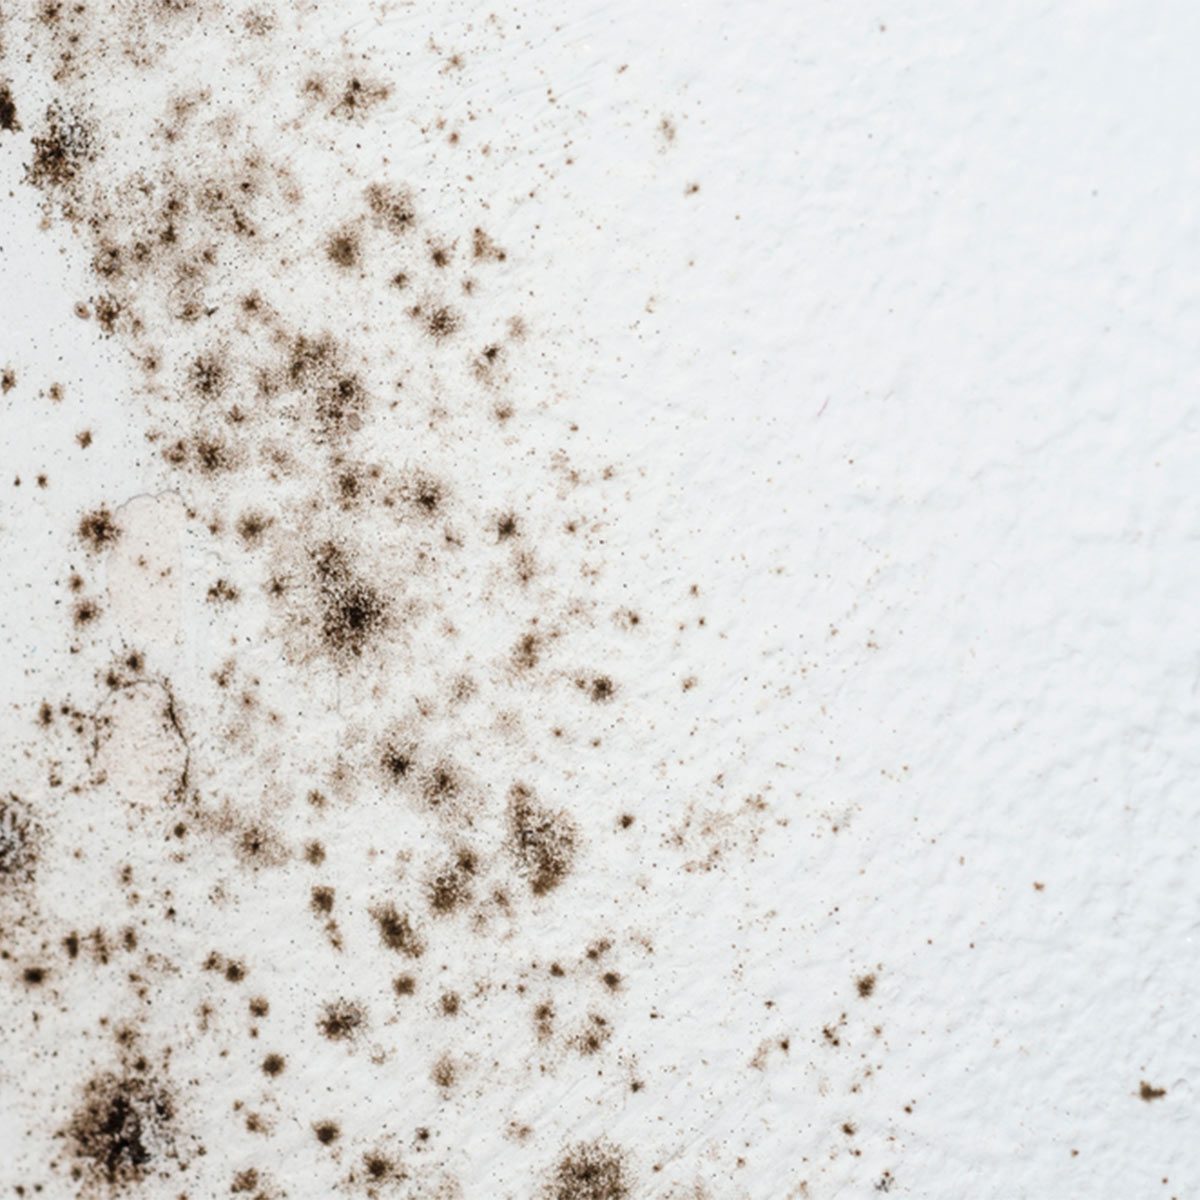 How to Get Rid of Black Mold - Removing Black Mold From Shower, Ceiling &  Walls